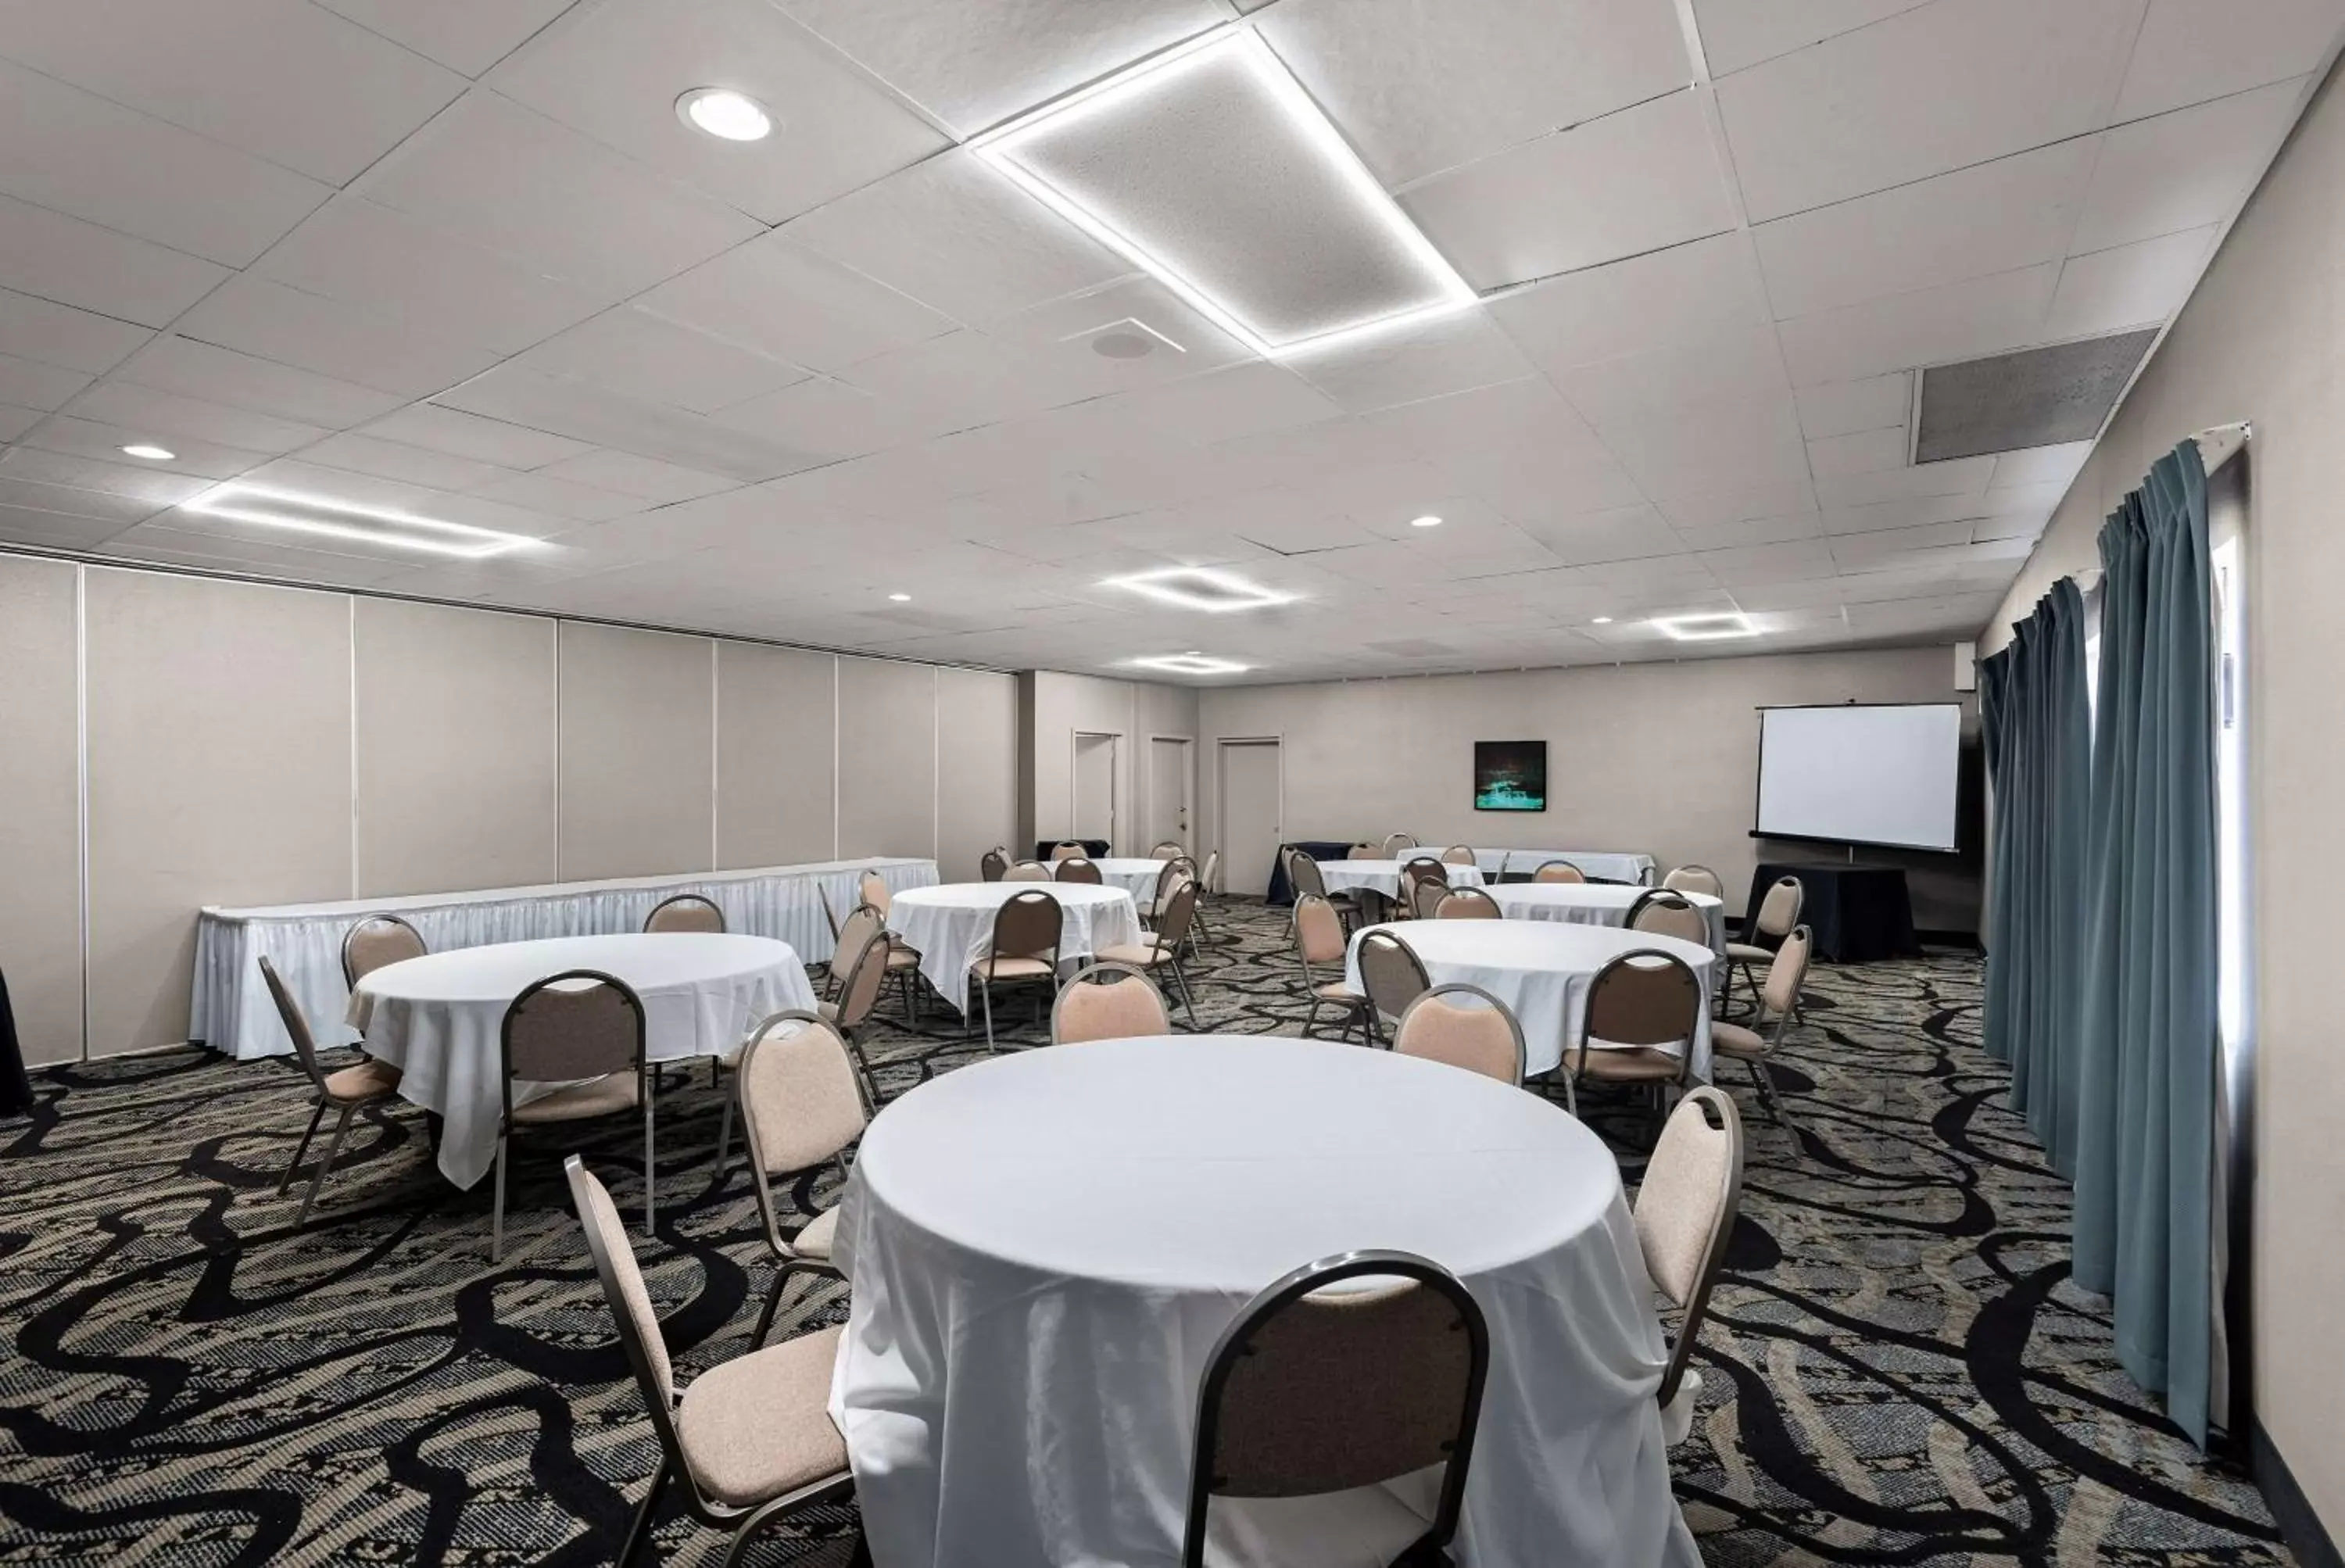 Meeting/conference room, Banquet Facilities in Wyndham Garden Ankeny